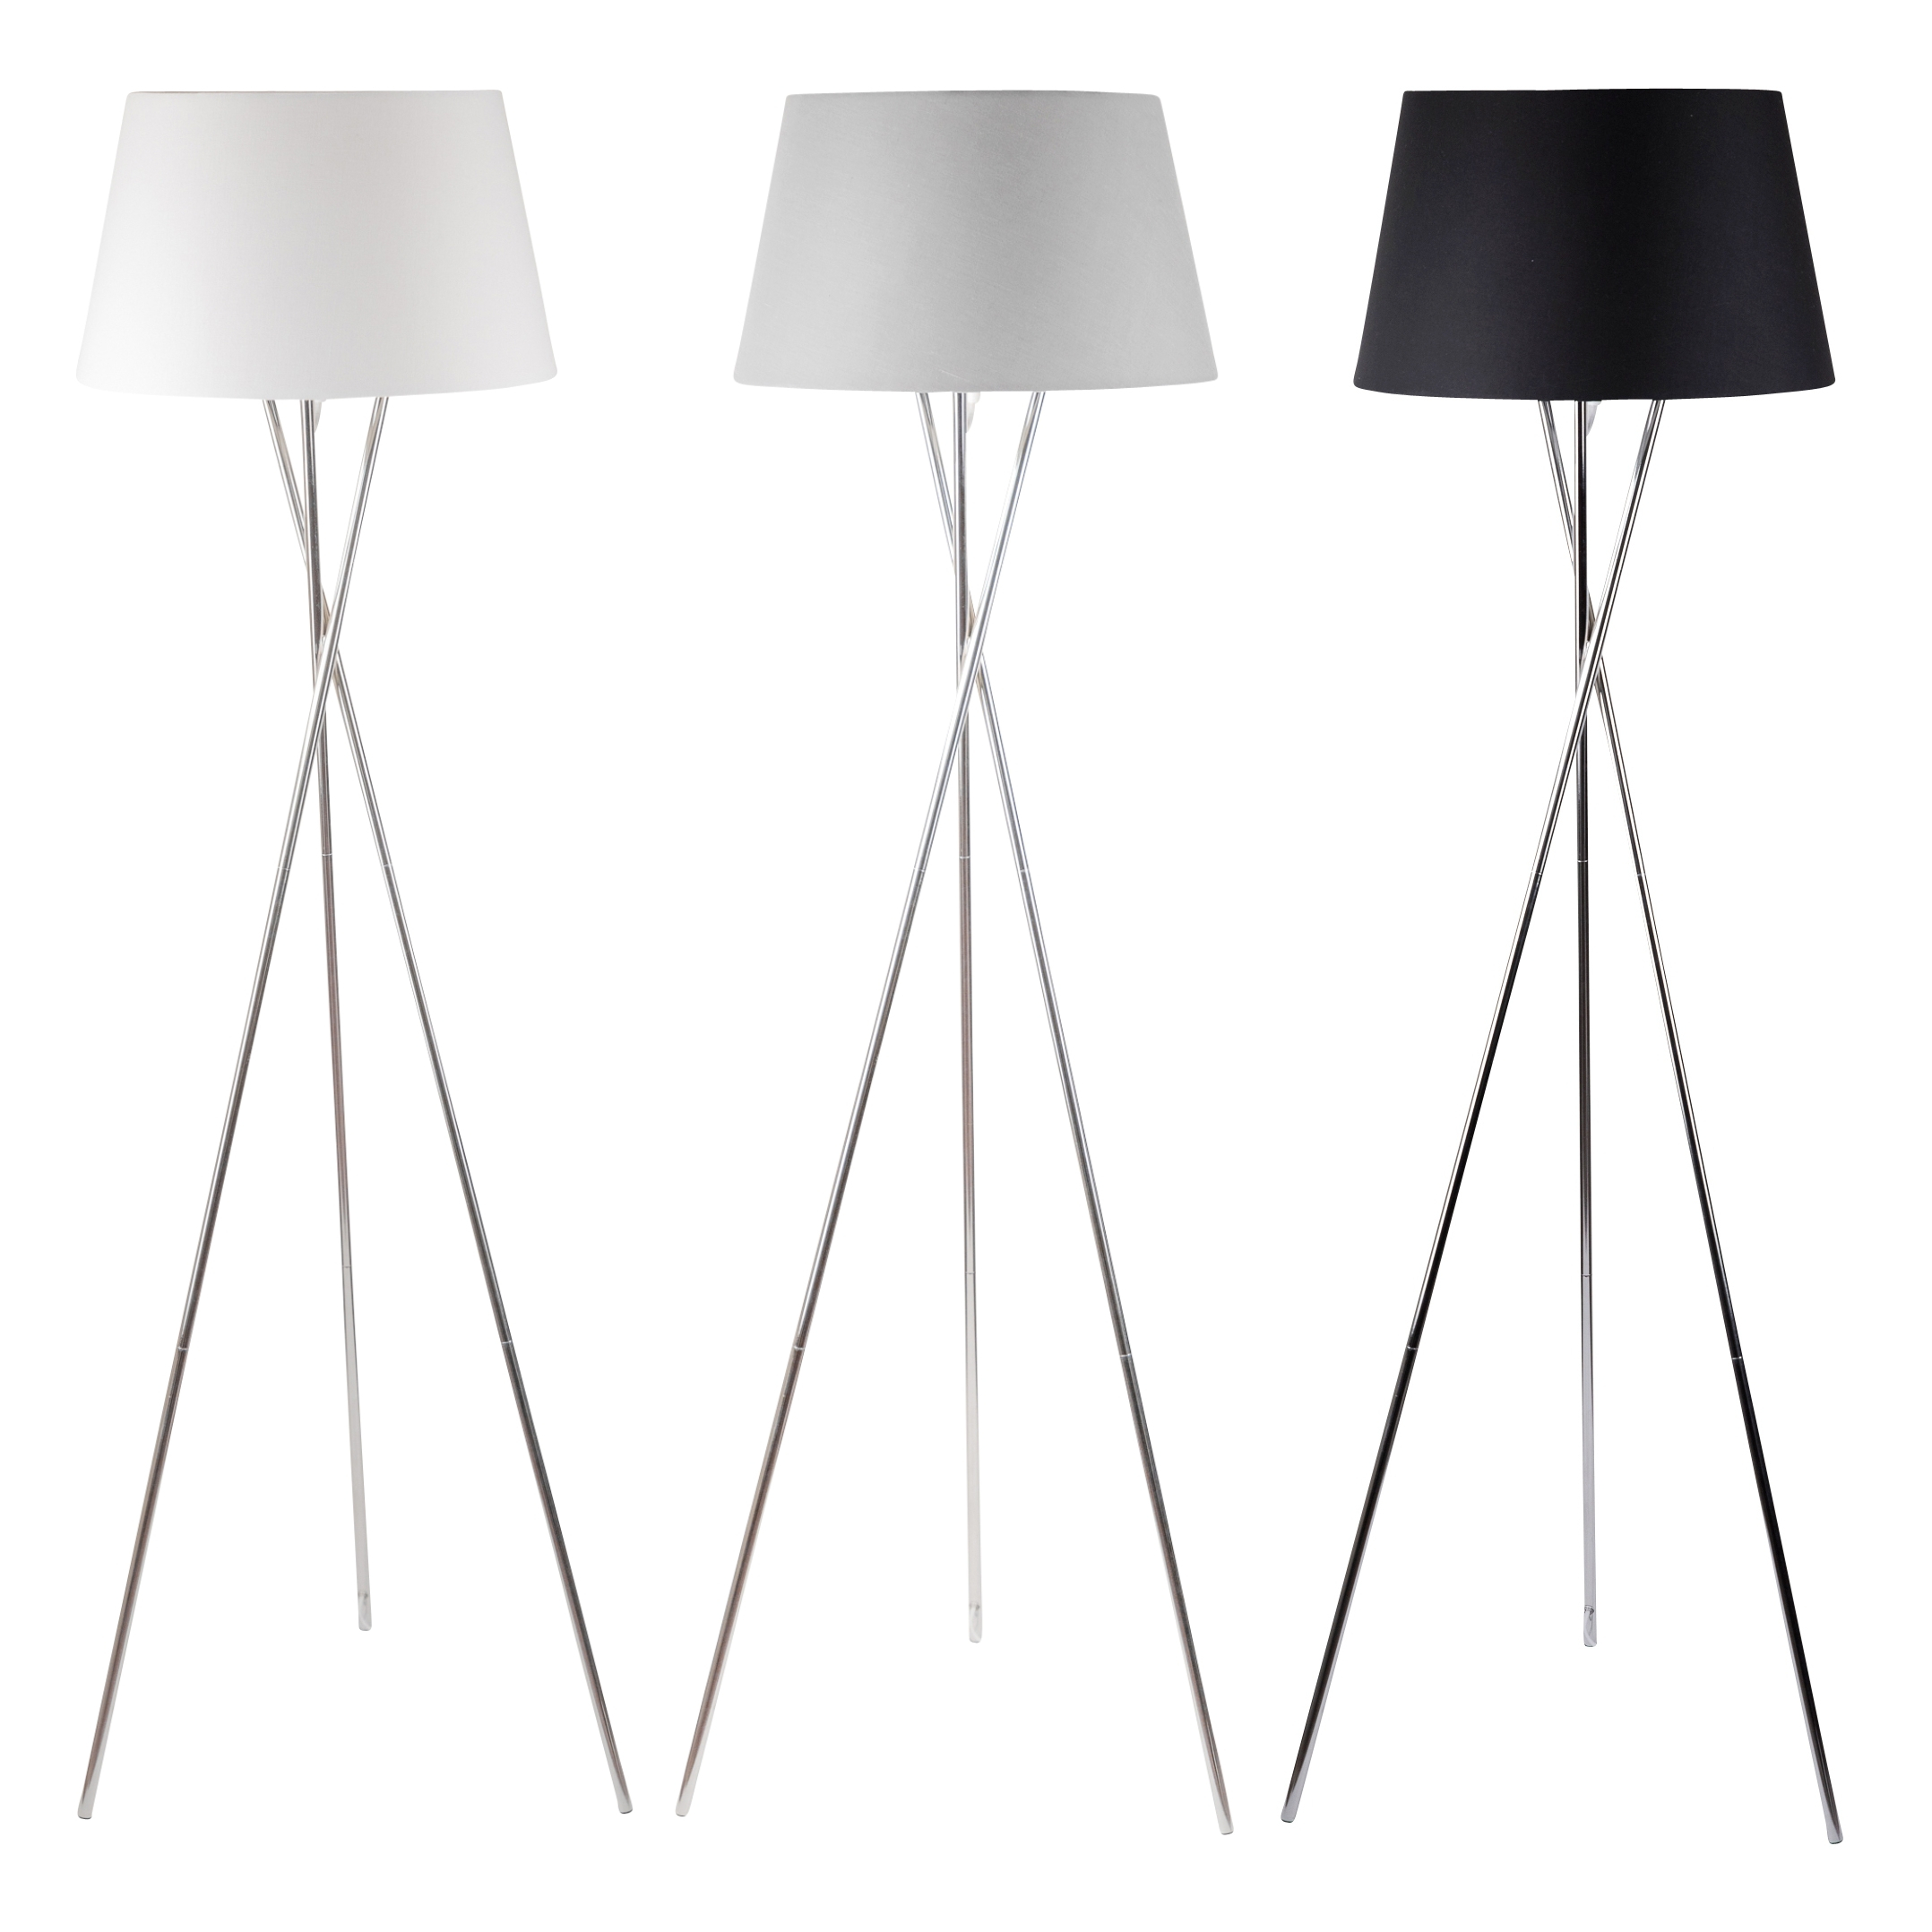 Details About Modern Chrome Twist Tripod Floor Lamp Standard Light Grey White Or Black Shade in proportions 2156 X 2156